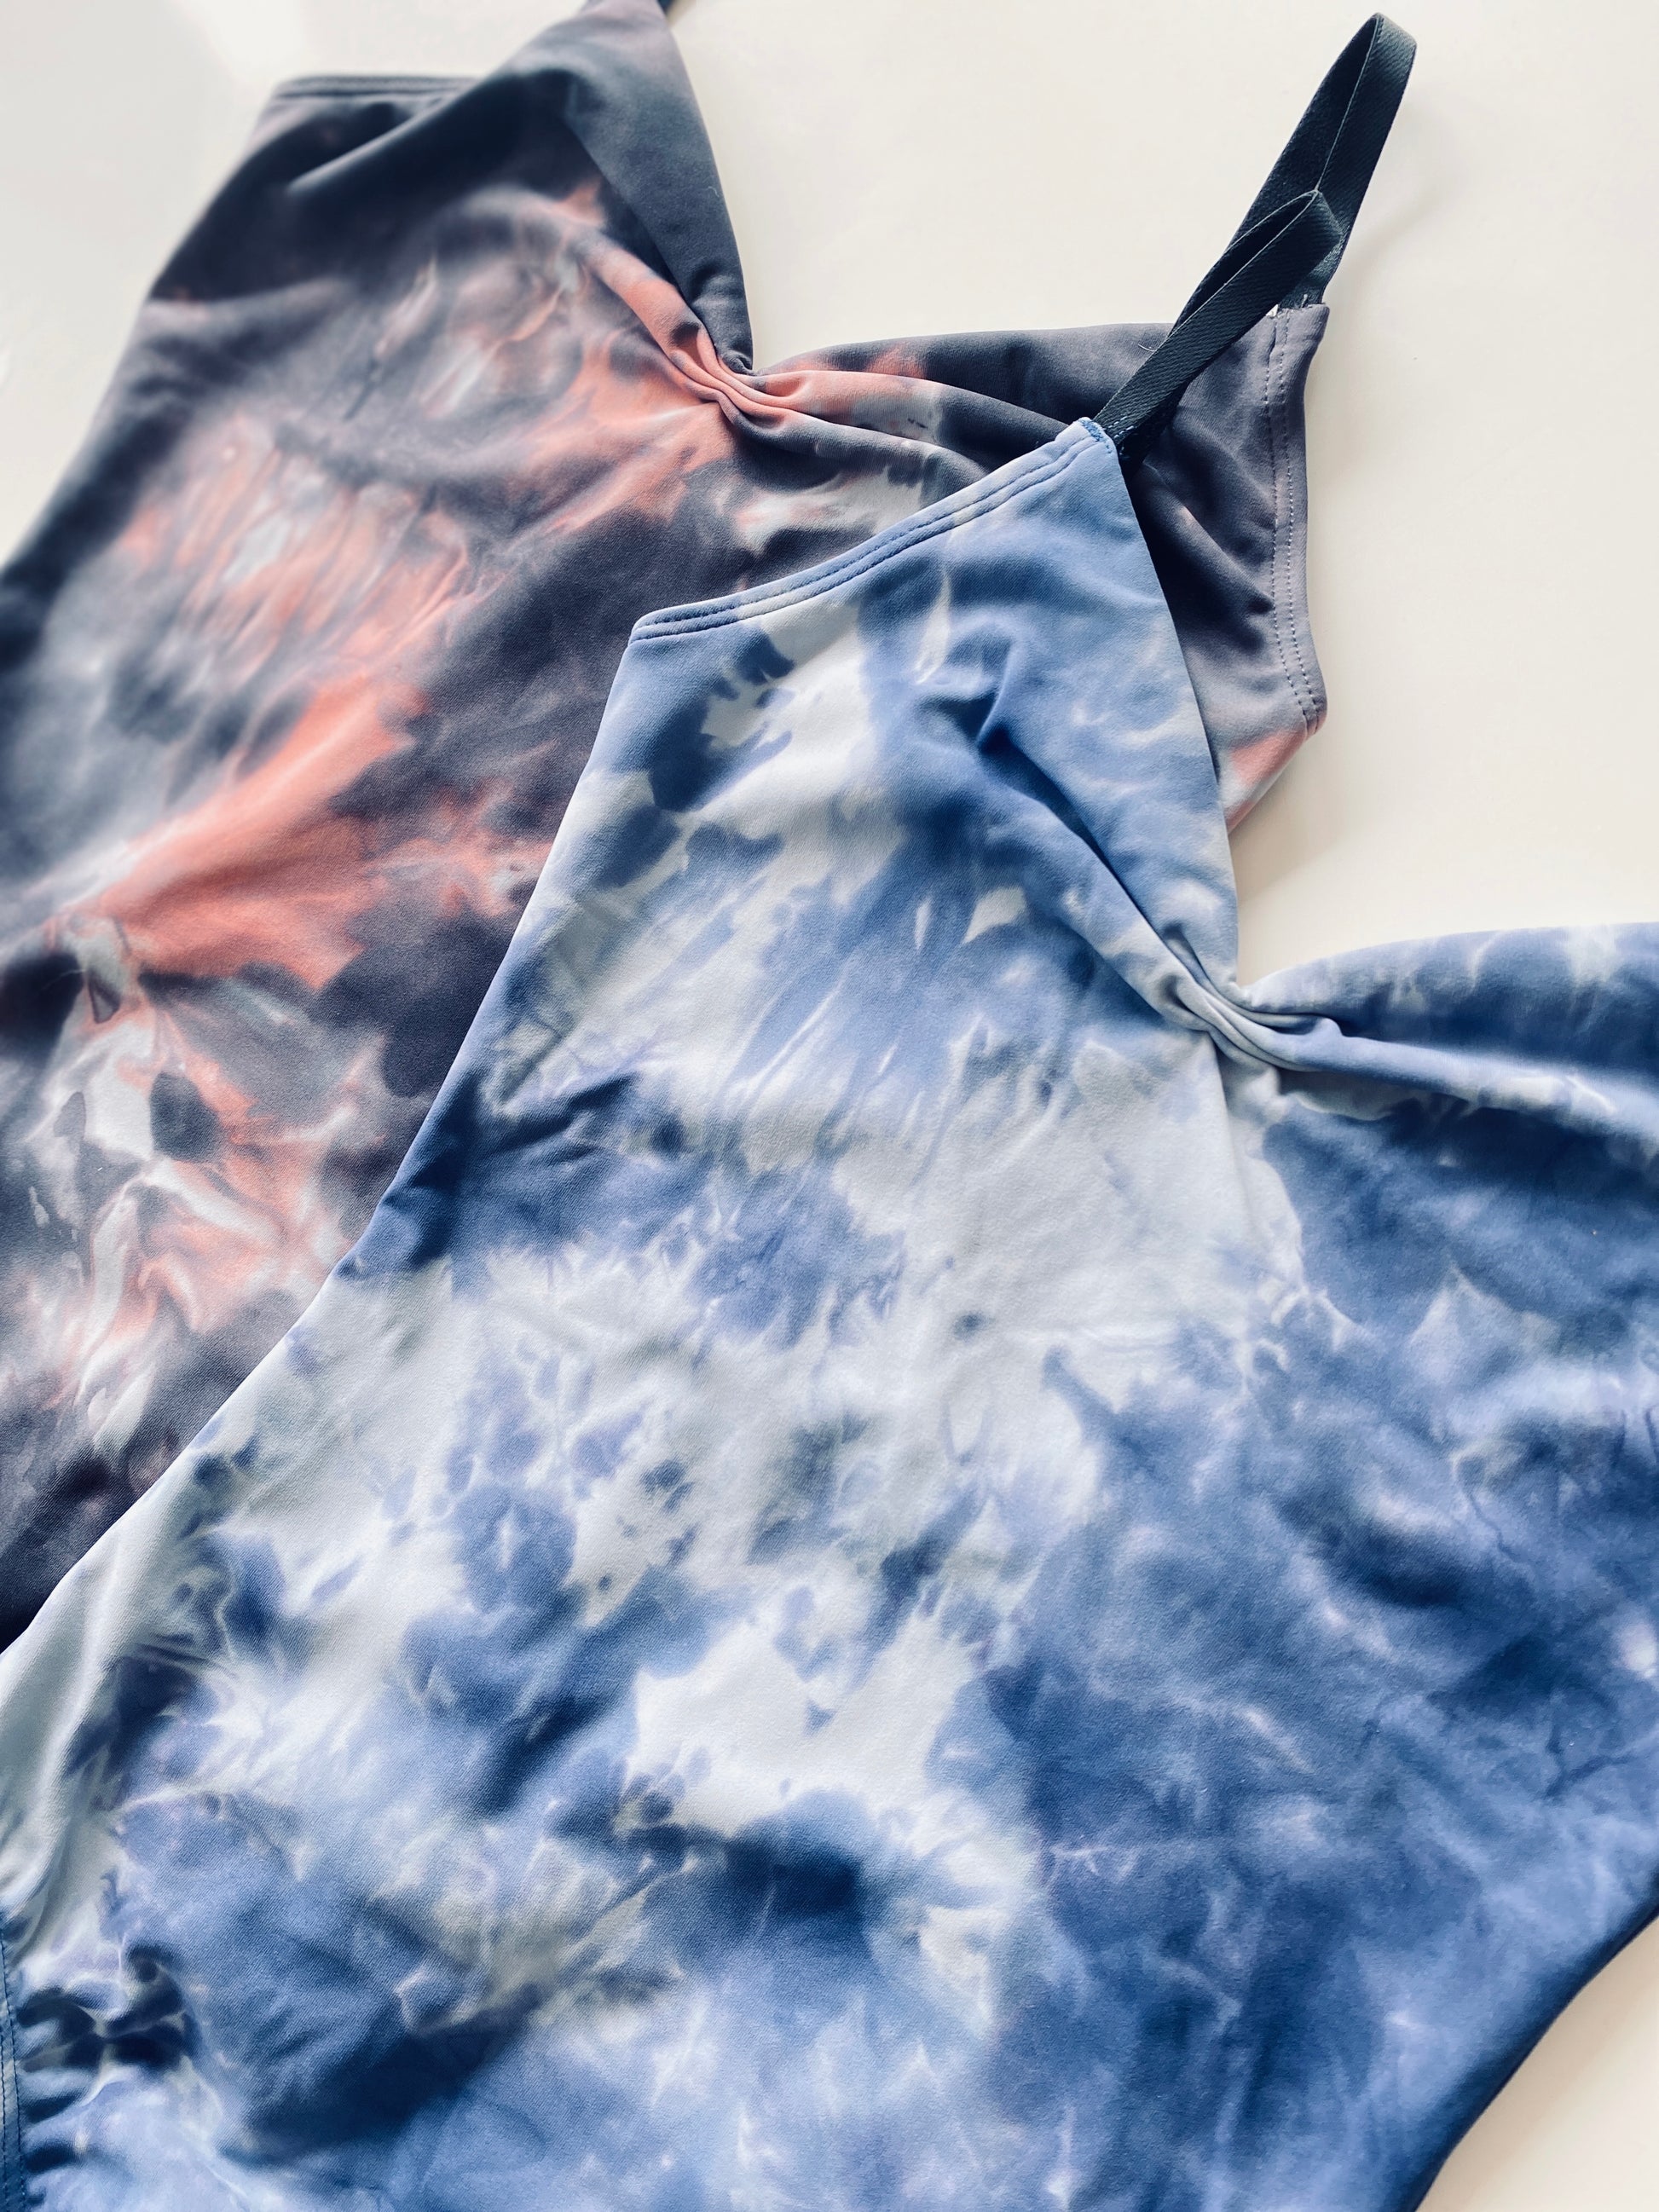 Blue Tie Dye camisole Leotard from Baiwu sold by The Collective Dancewear